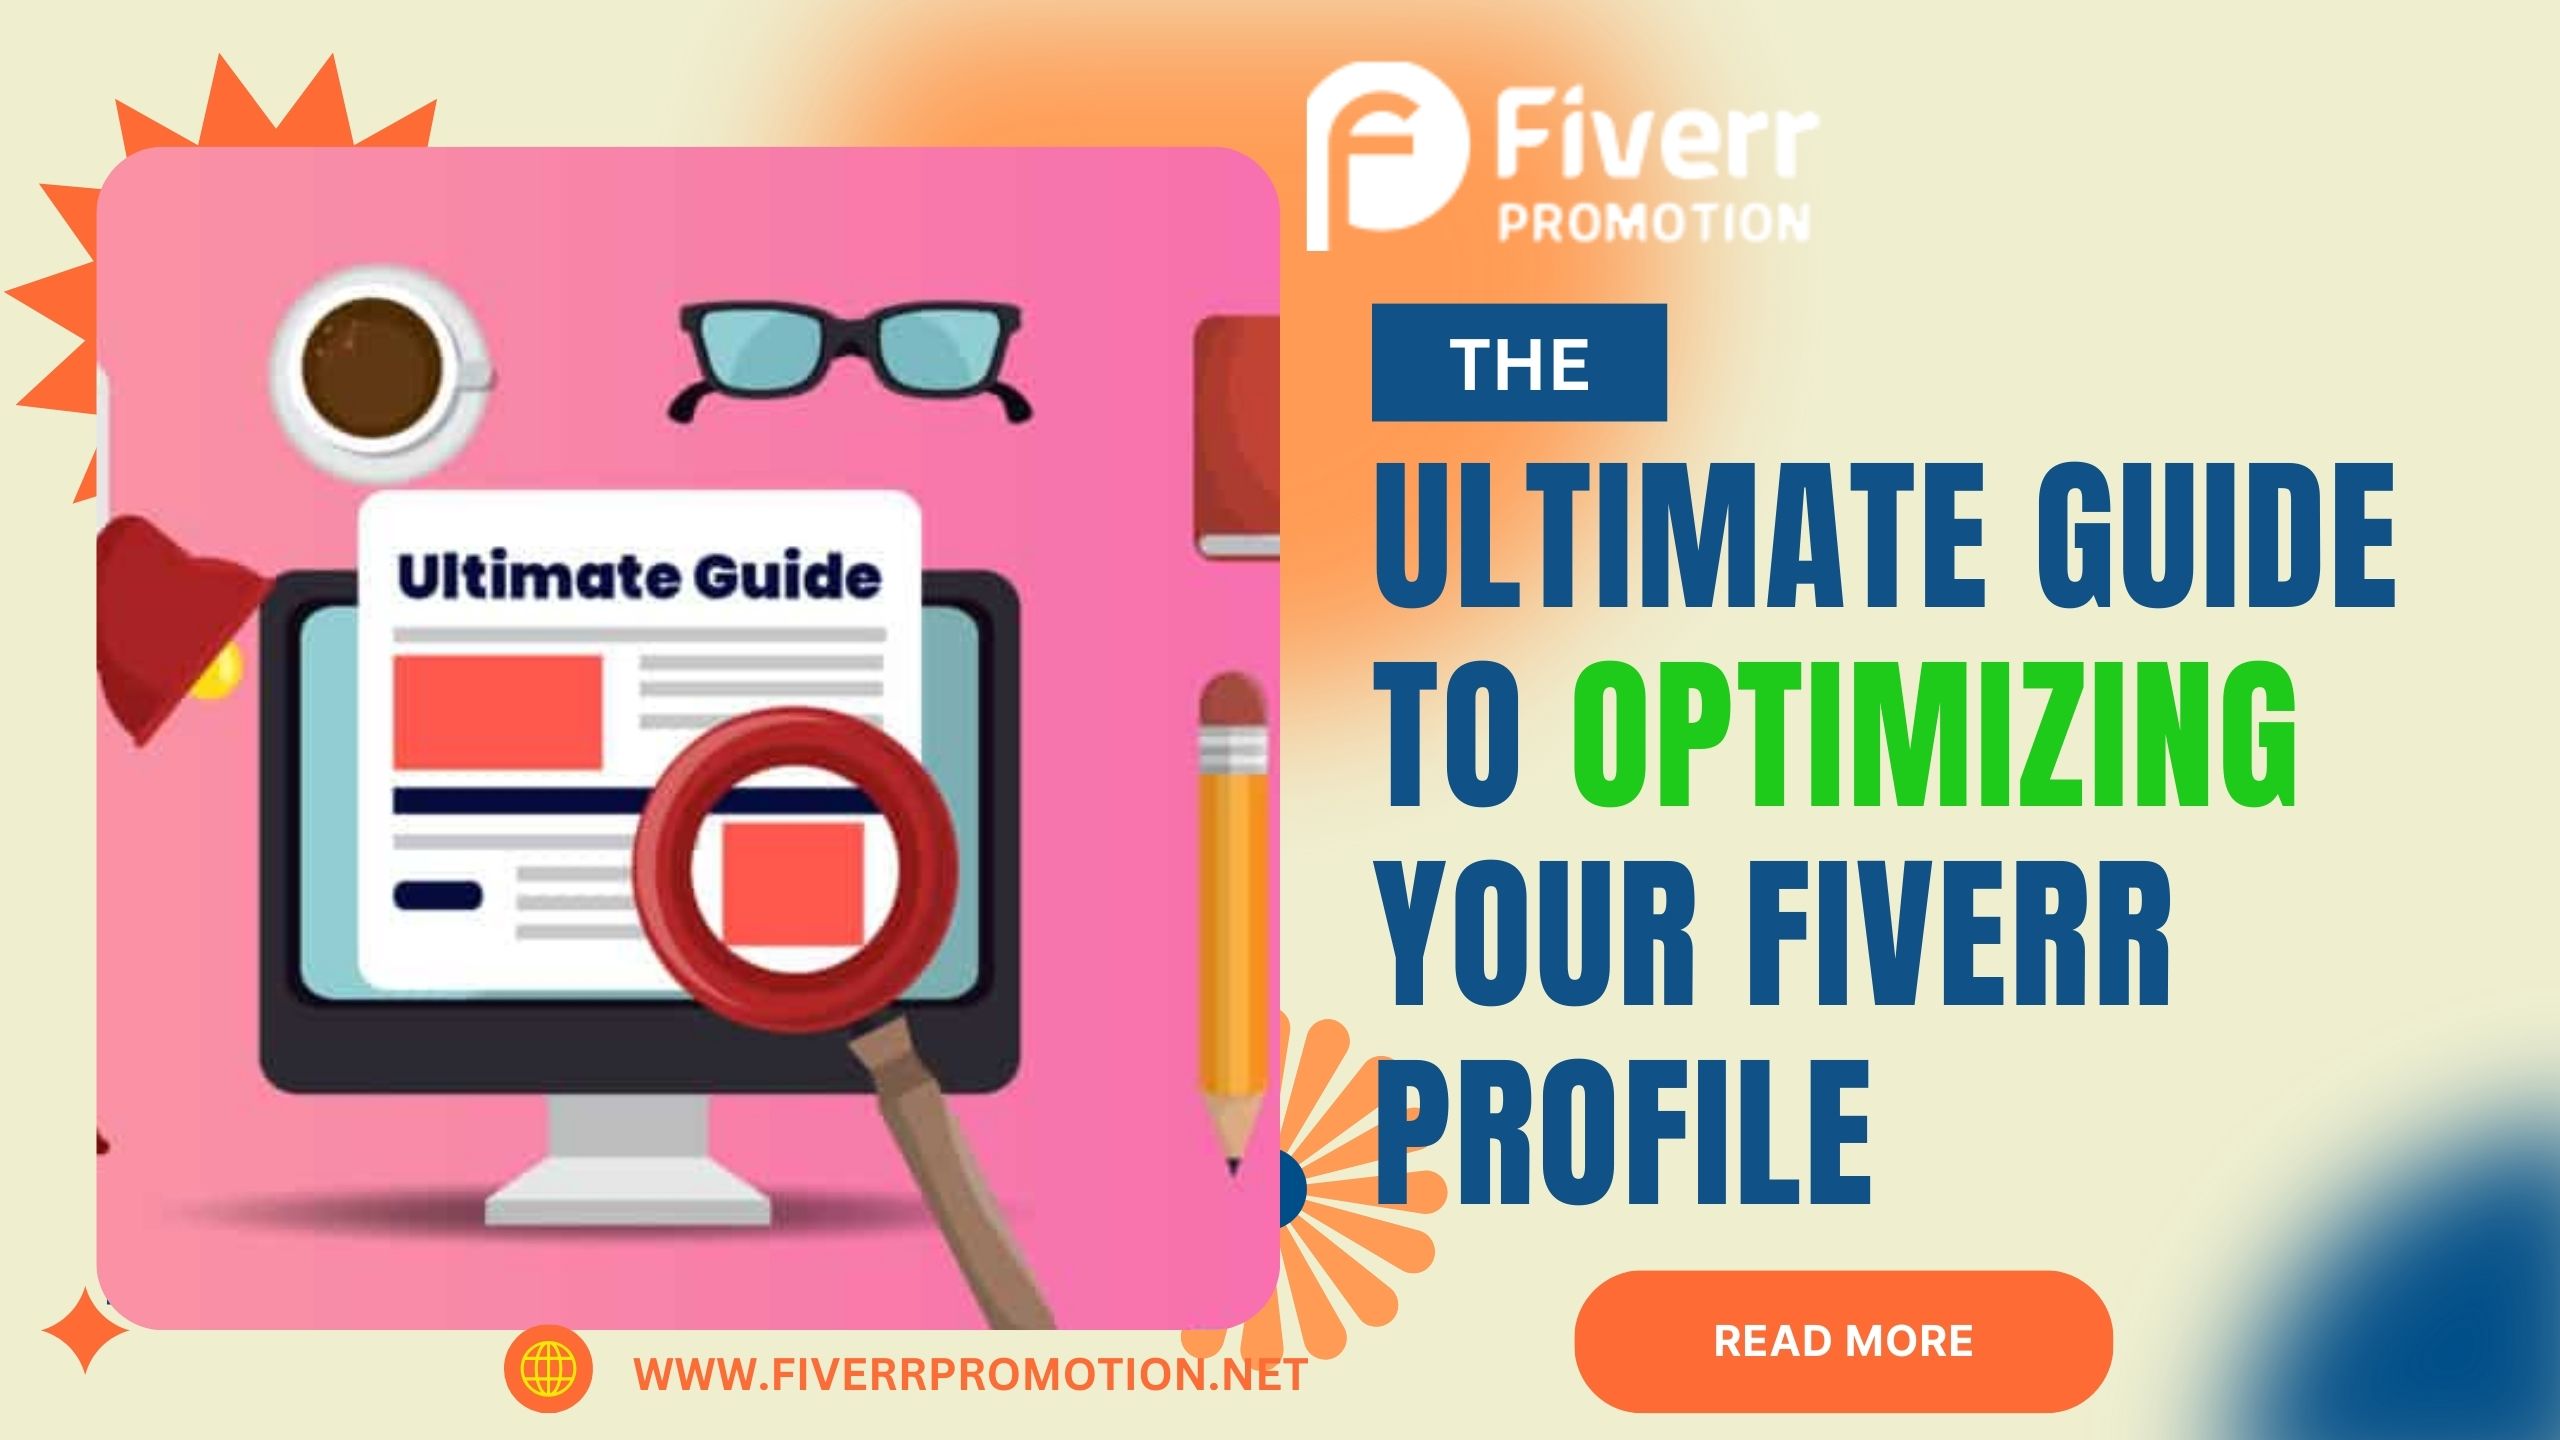 The ultimate guide to optimizing your Fiverr profile